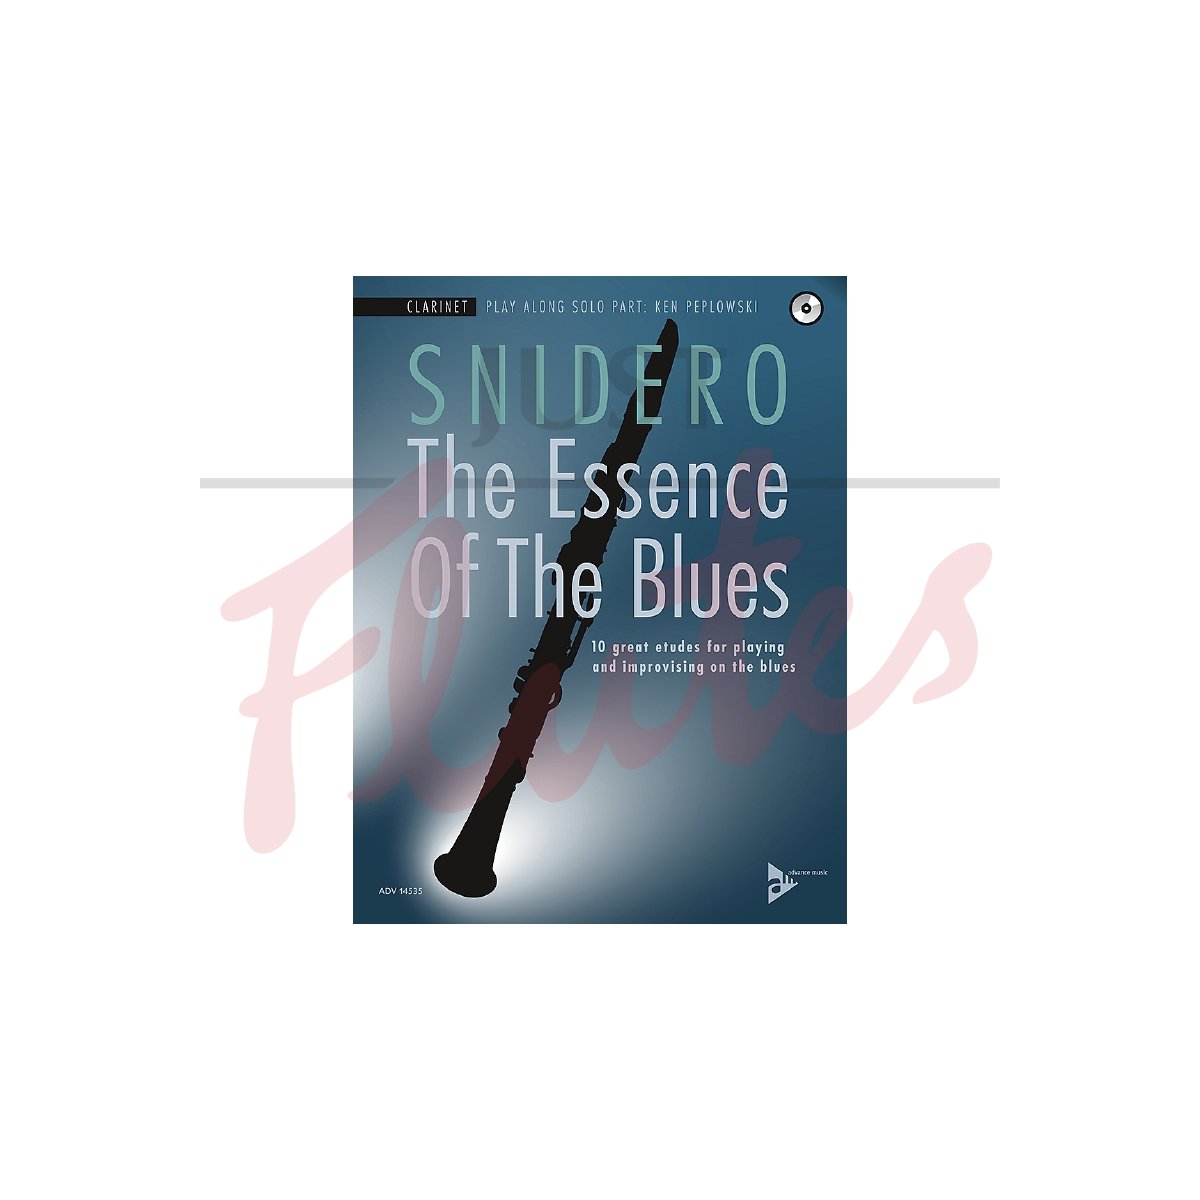 The Essence Of The Blues [Clarinet]